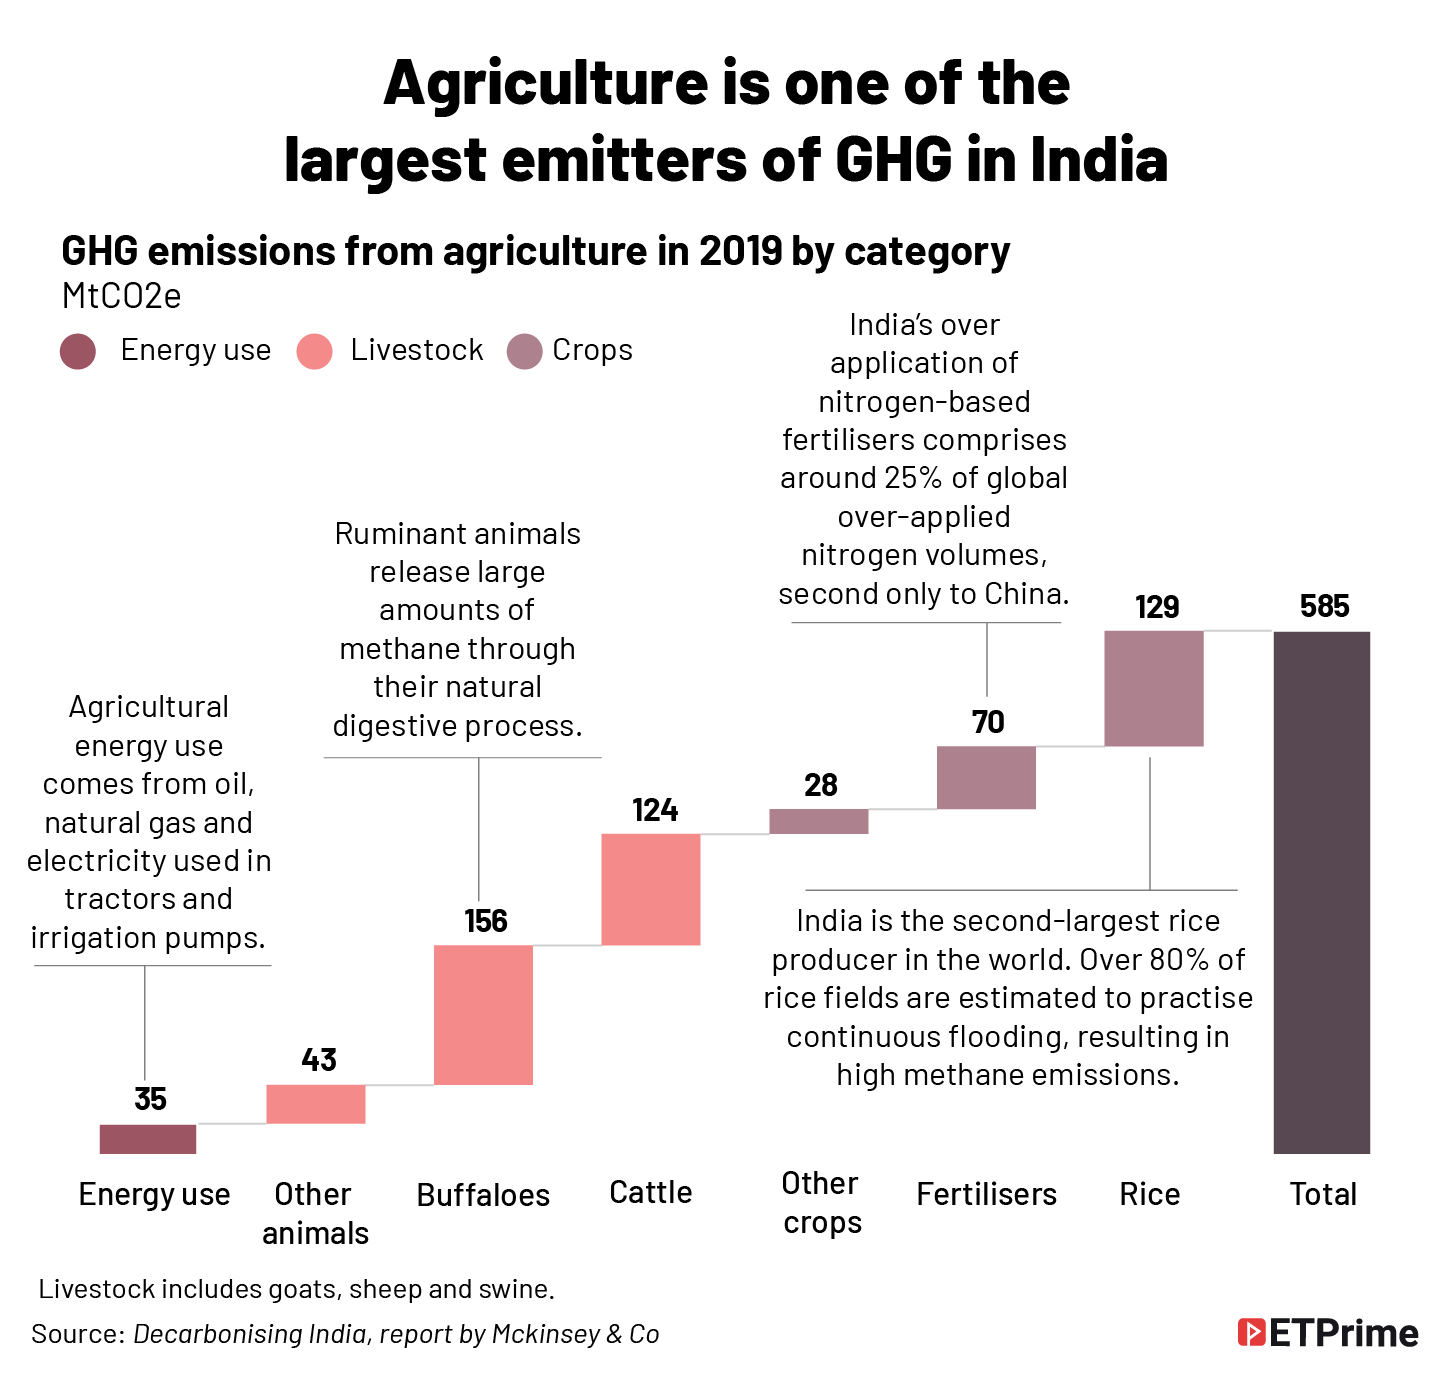 Agriculture is one of the _largest emitters of GHG in India@2x